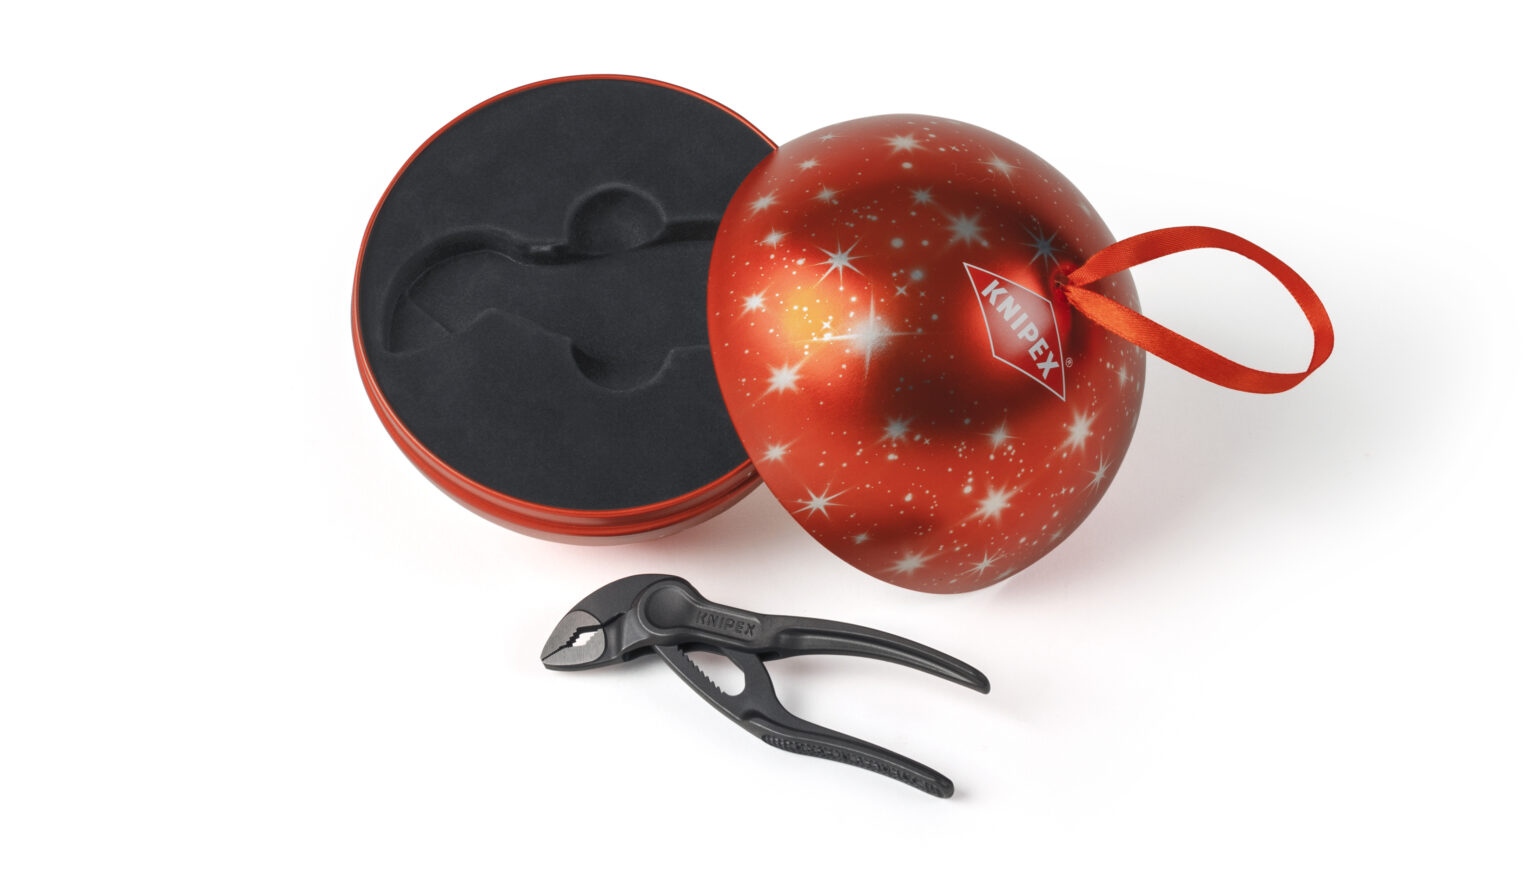 KNIPEX Tools Releases LimitedEdition Christmas Ornament Mechanical